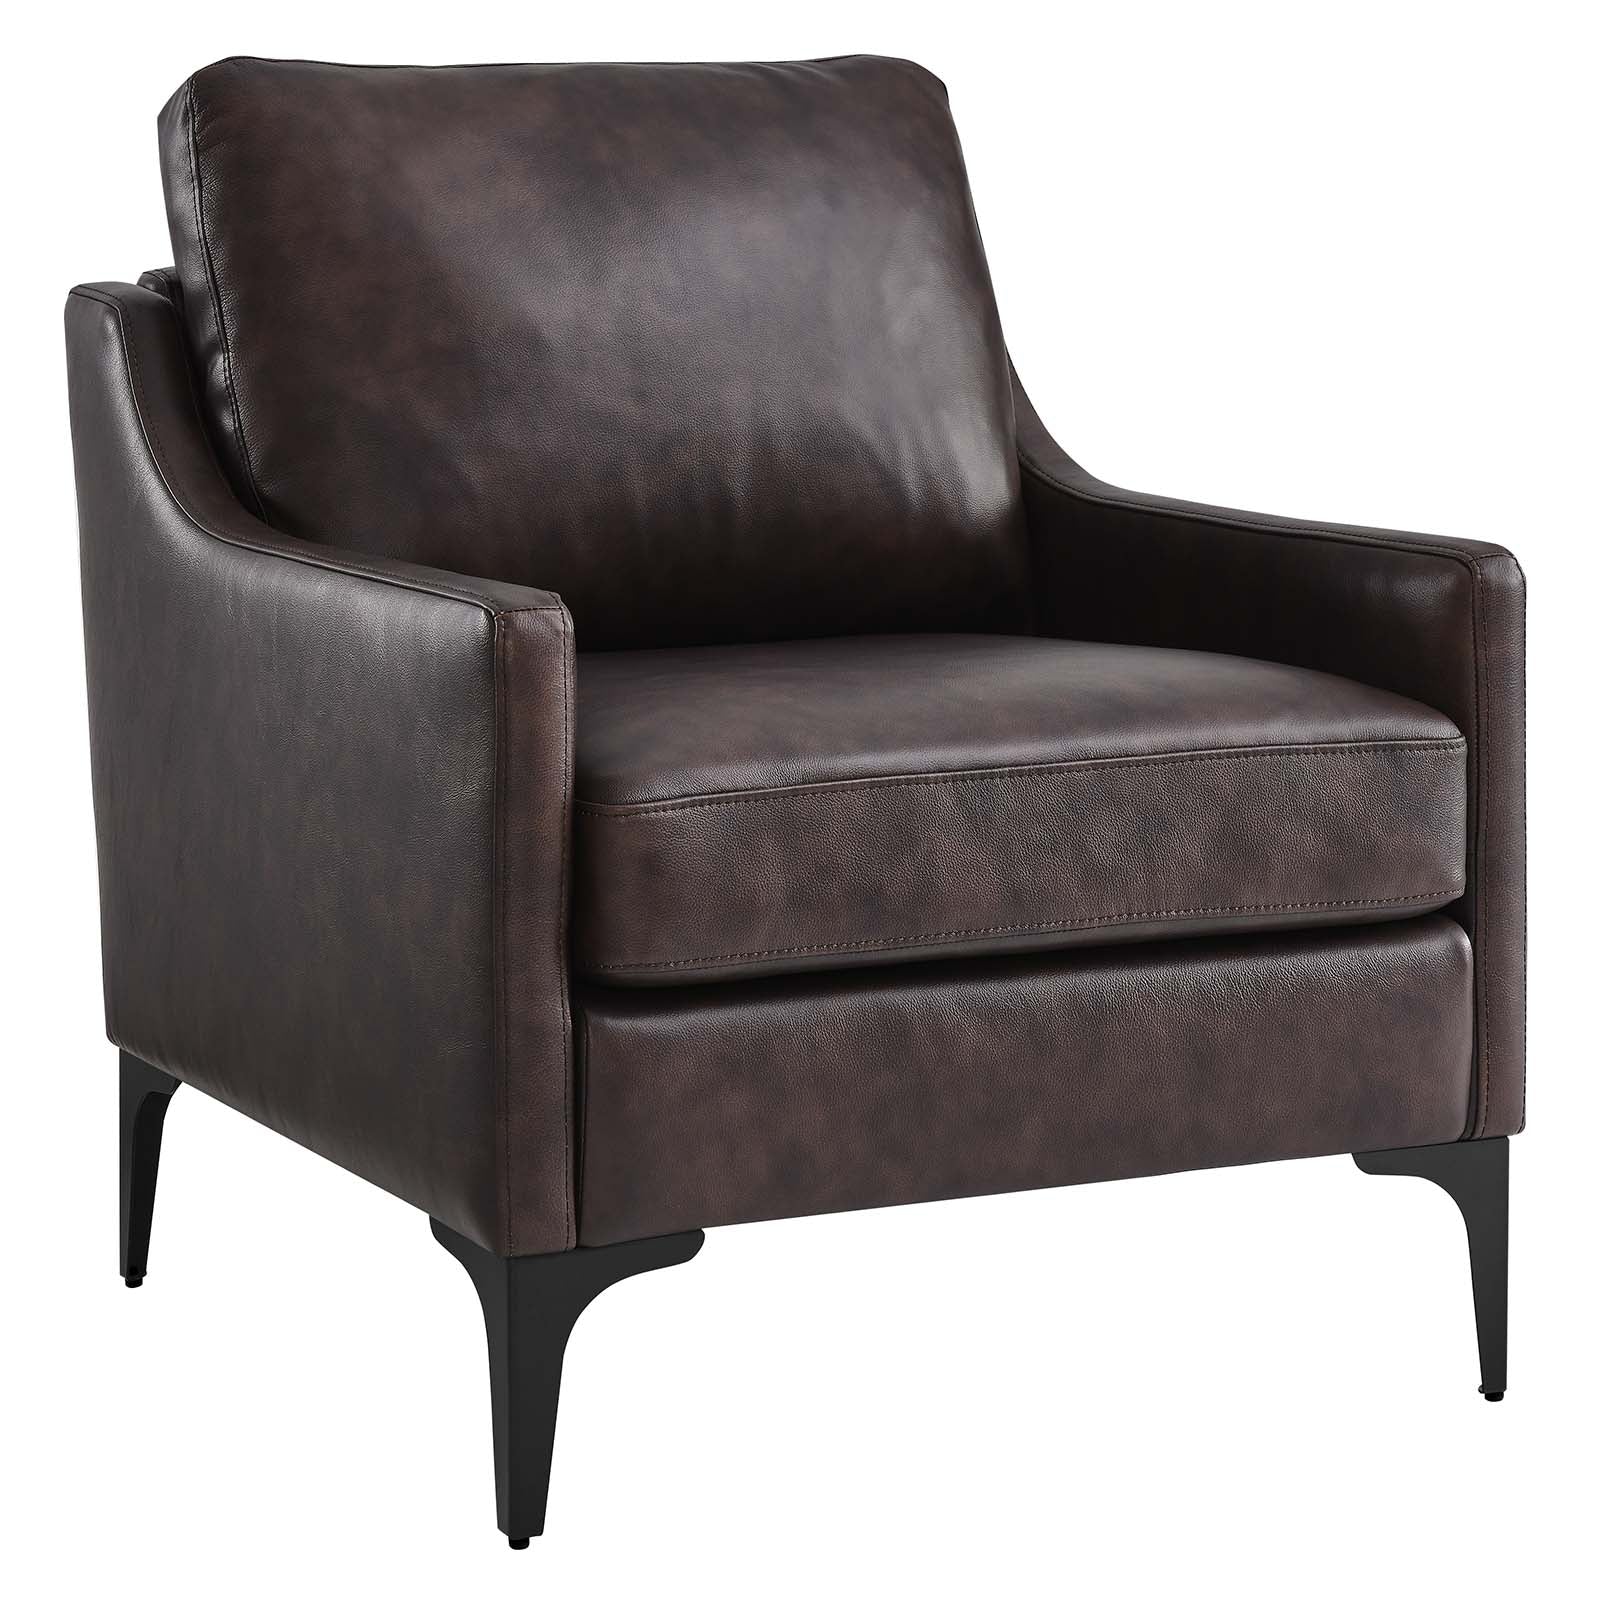 Modway Accent Chairs - Corland Leather Armchair Brown